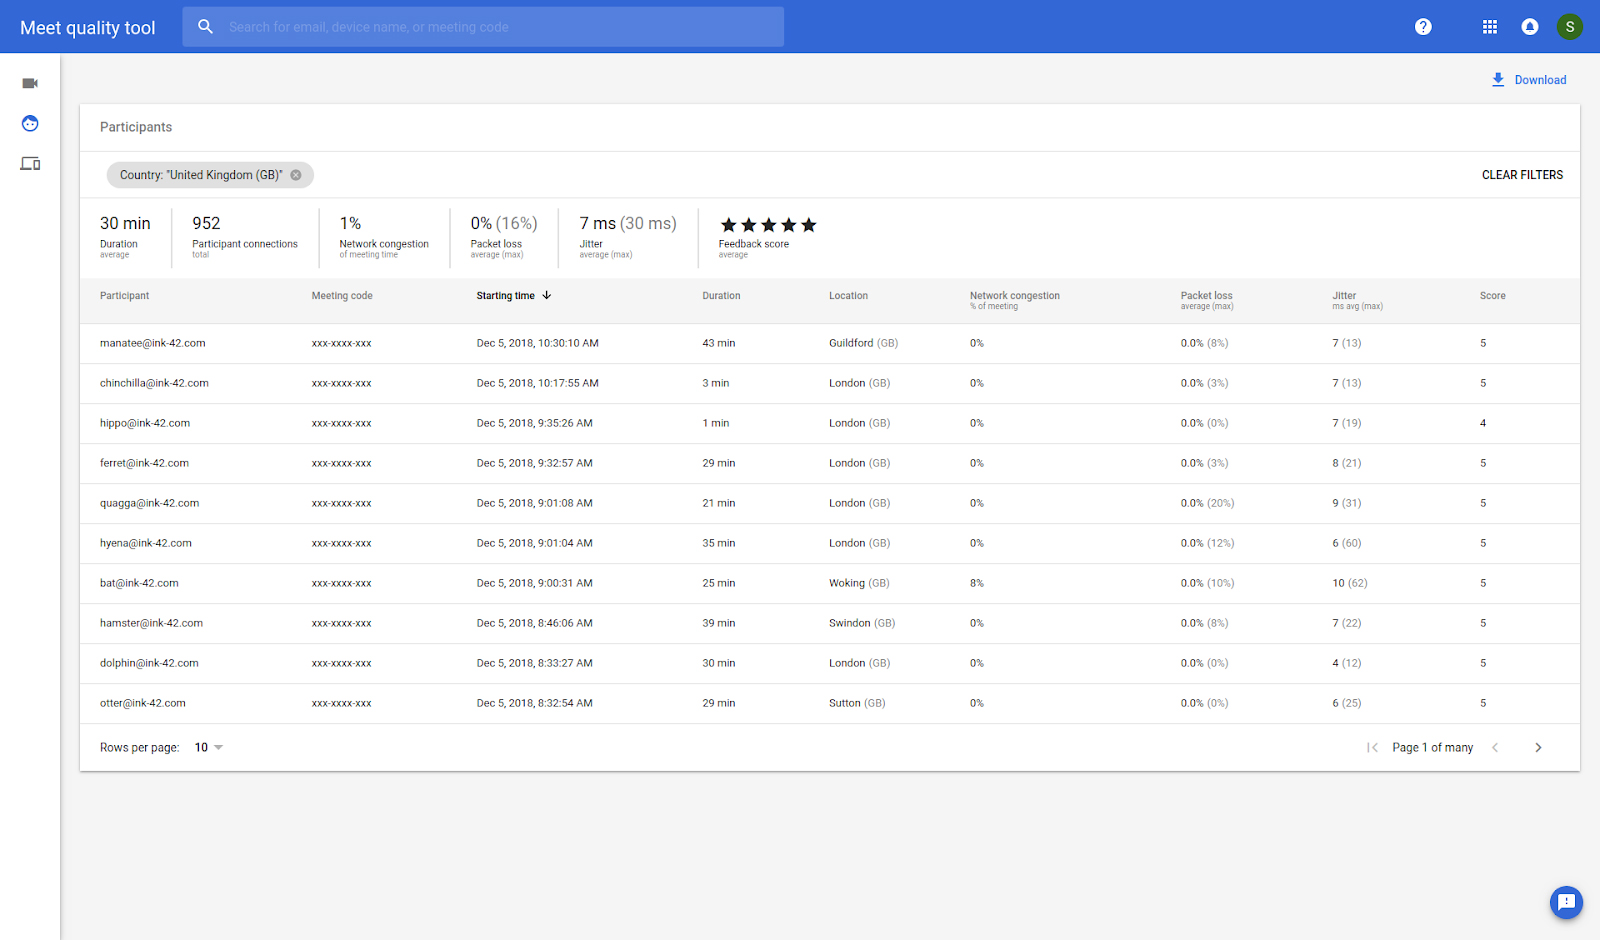 Google Voice provides usage and activity reports.